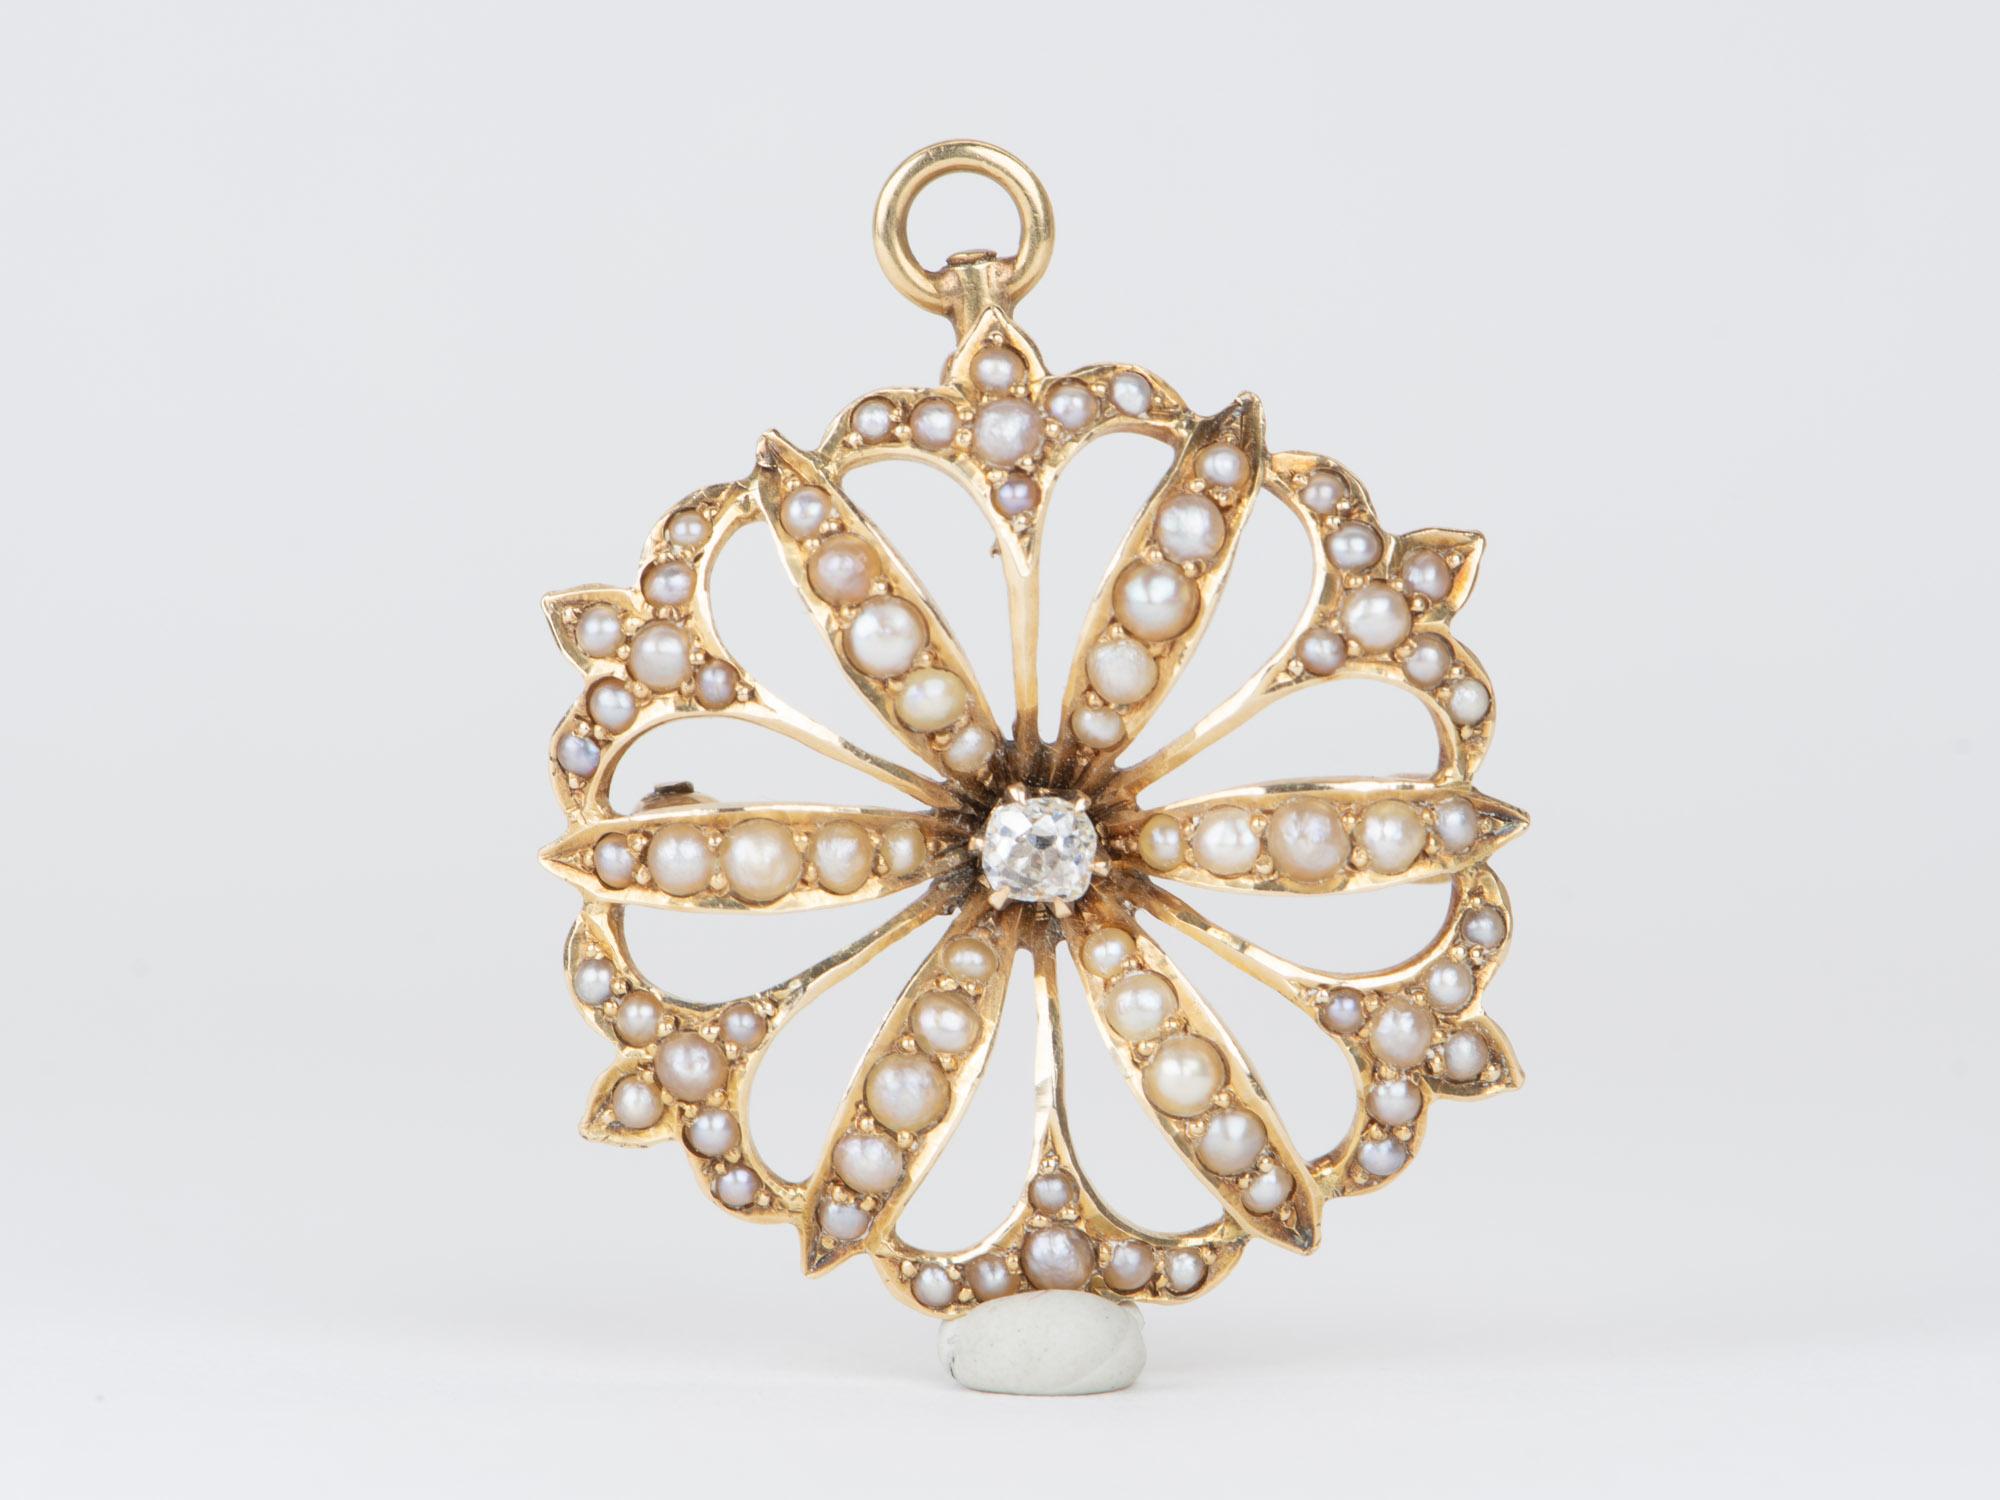 ♥ A solid 14K yellow gold floral brooch/pendant convertible piece made with seed pearls
♥ The brooch measures 25 mm in length, 25 mm in width, and 2.6 mm thick.

♥ Material: 14K Yellow Gold
♥ All pearls used are genuine and without any color